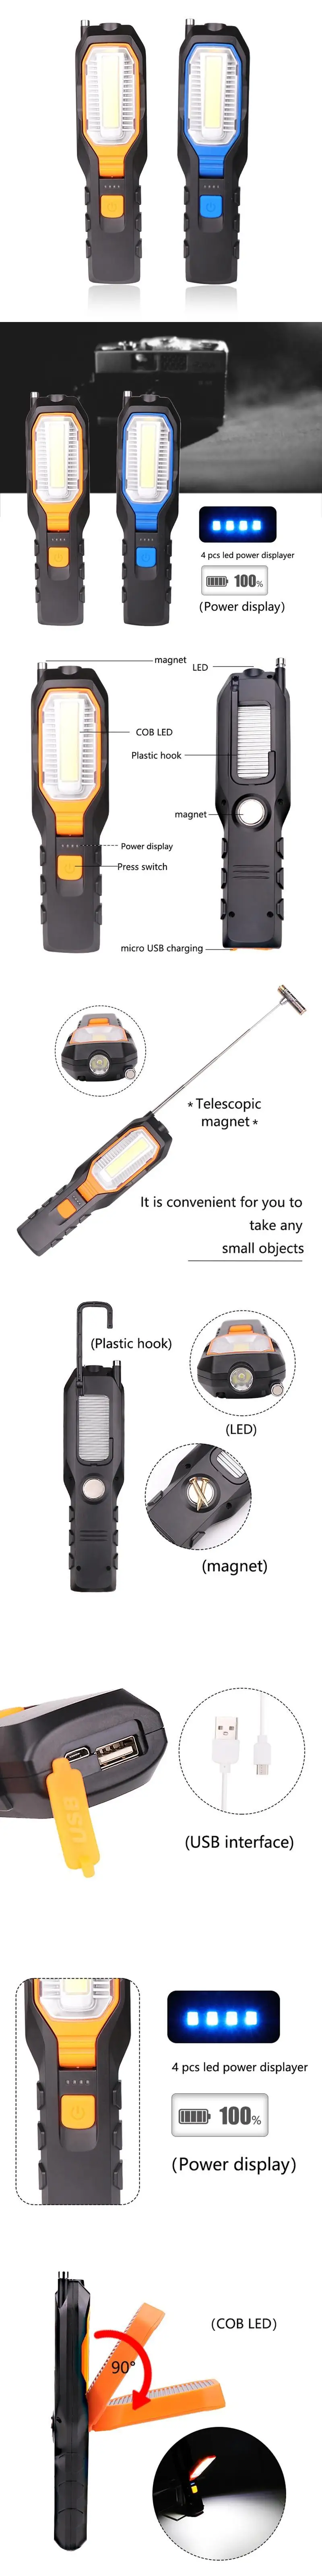 T6 1000 Lumens Multifunction 3 in 1 COB+ LED 180 Rotation Workshop Torch Lamp With Magnet Folding Design